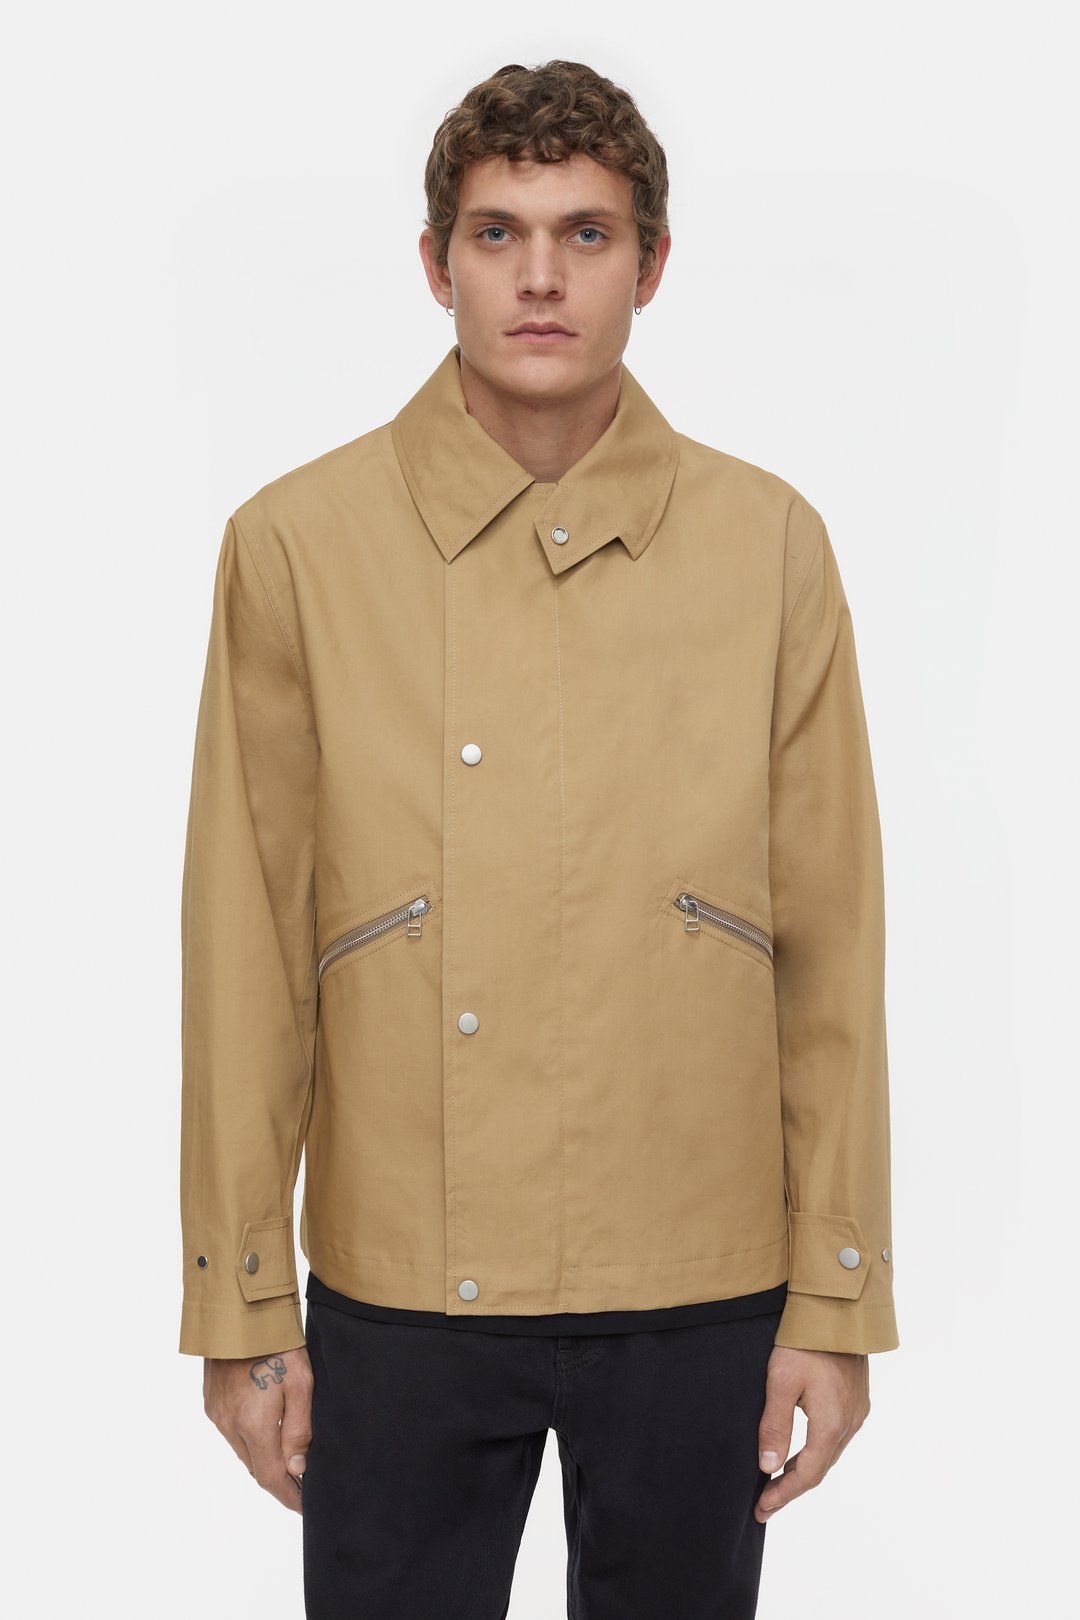 CLOSED MENS MILITARY JACKET- TAUPE BEIGE